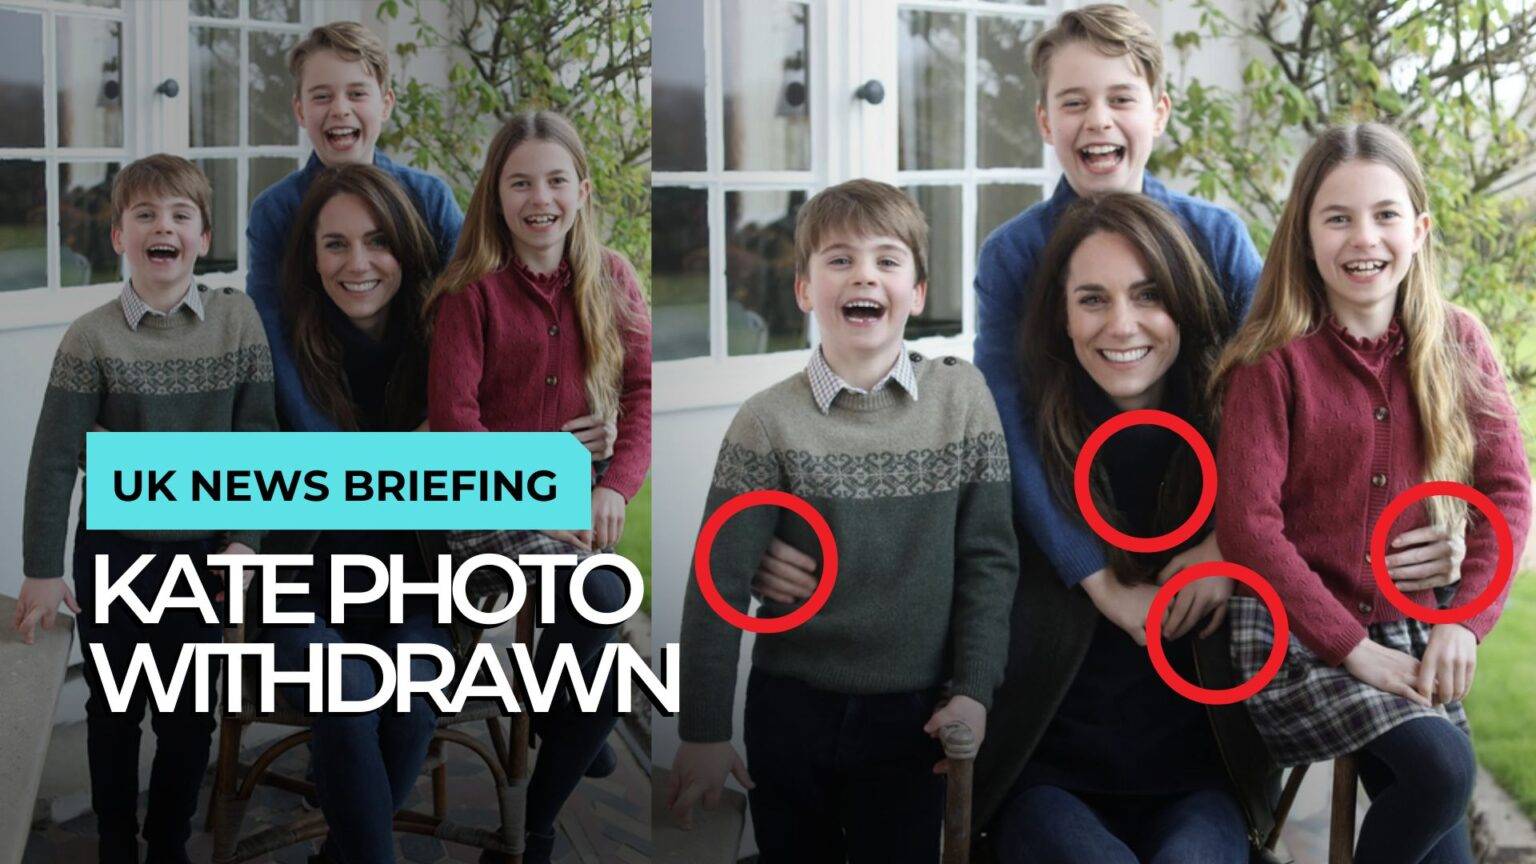 VIDEO – Kate’s Mother’s Day Photo Edited – Princess admits to editing image, Palace refuses to release the original